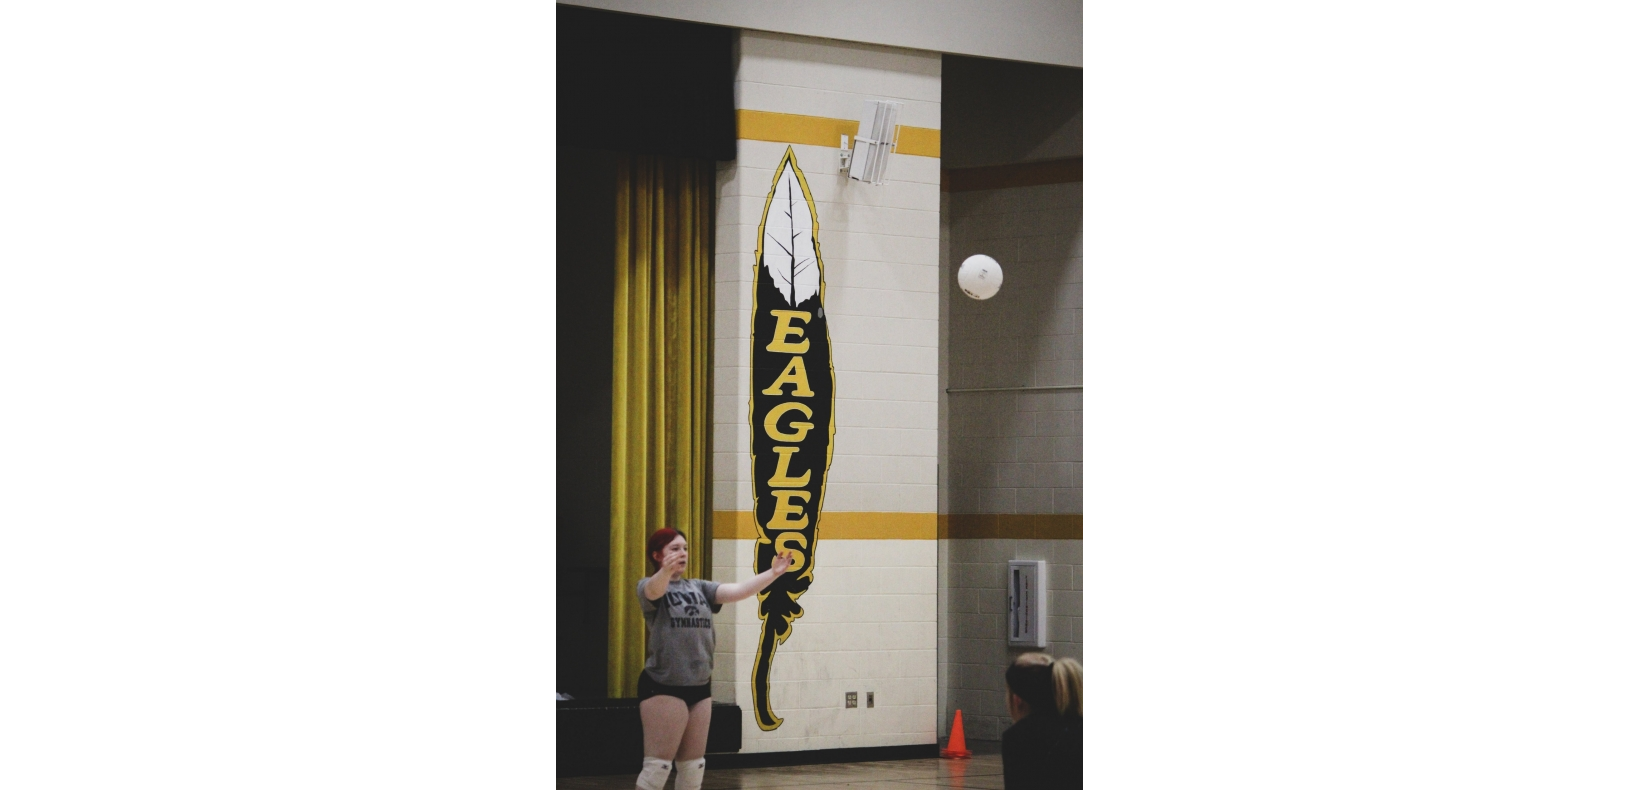 girl serving a volleyball